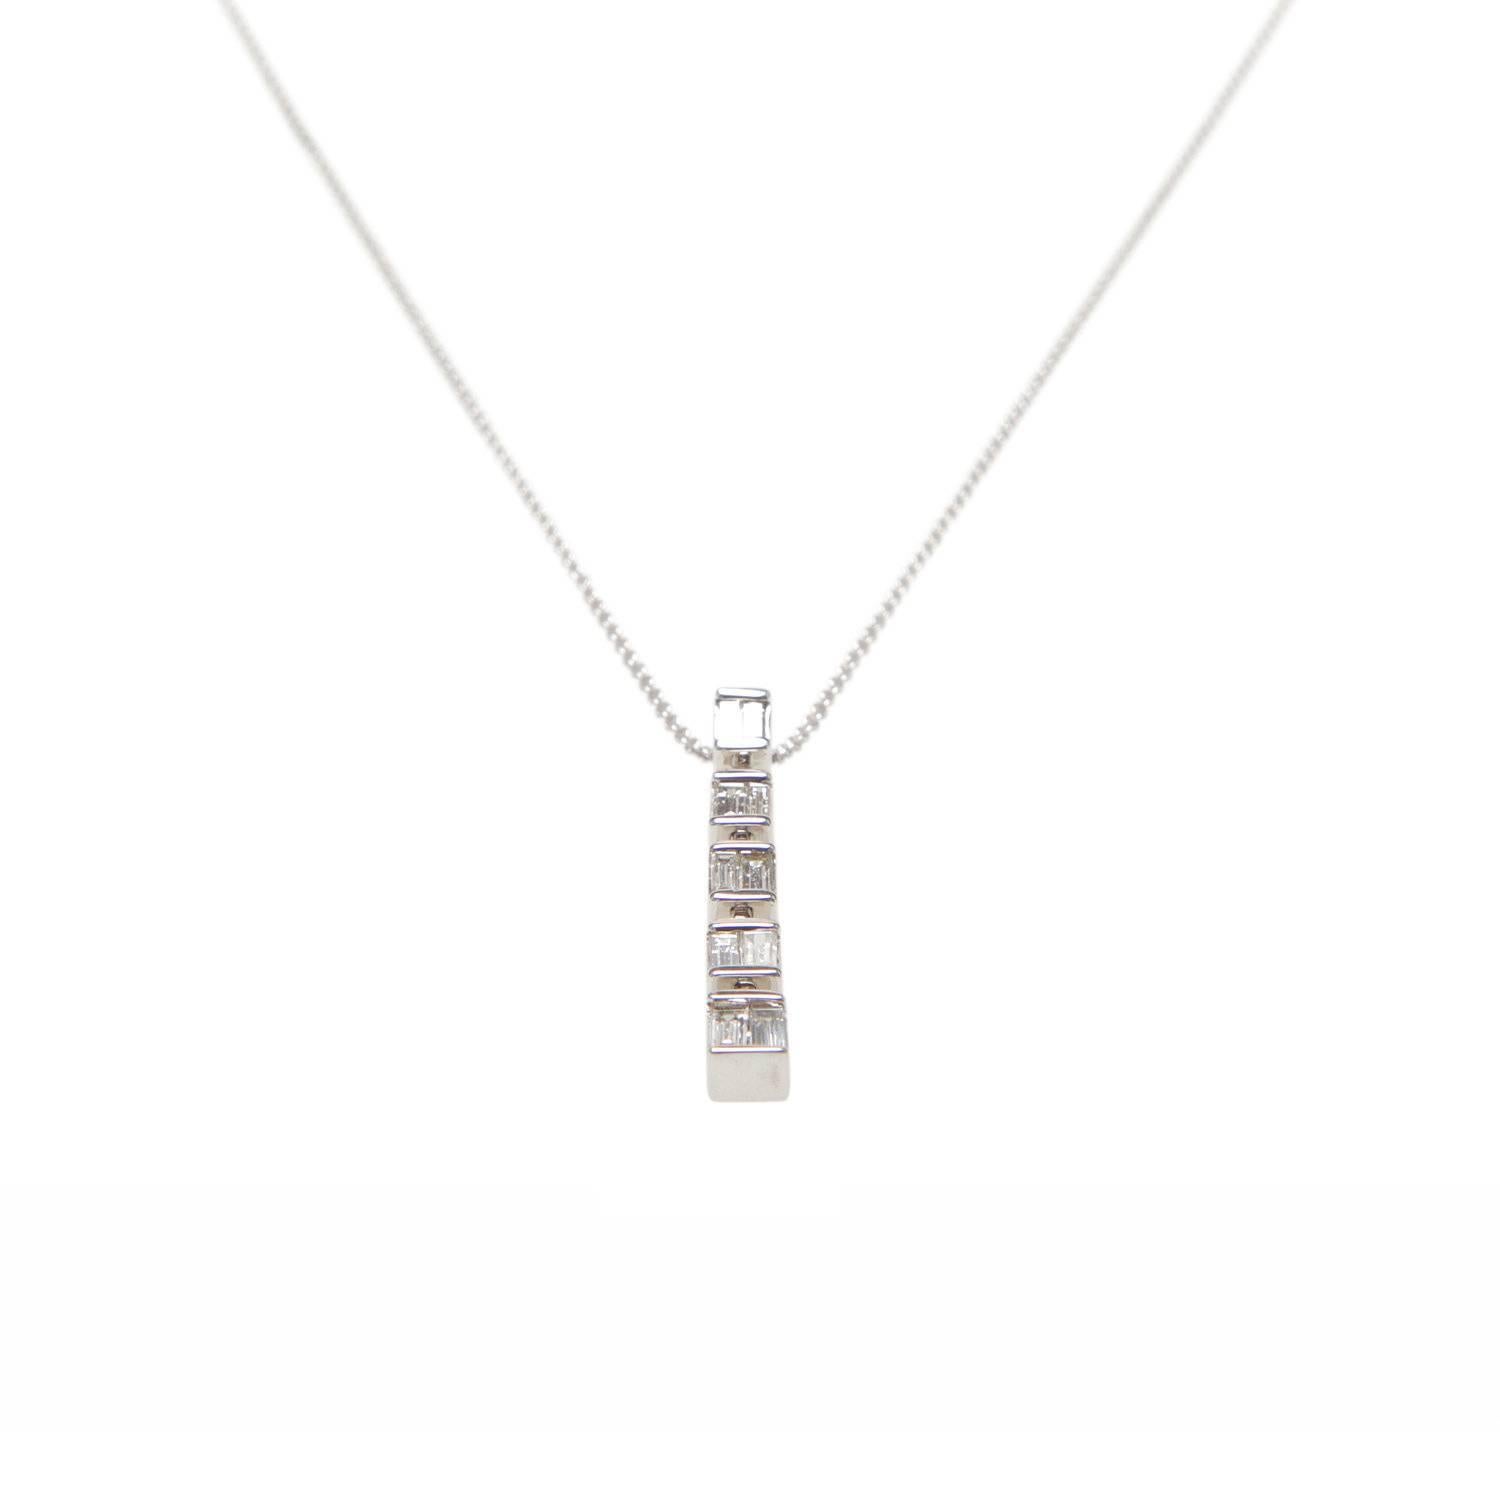 Vertical diamond baguette row pendant necklace in 14k white gold. 
200mm chain length with 4mm wide x 29mm high pendant.

